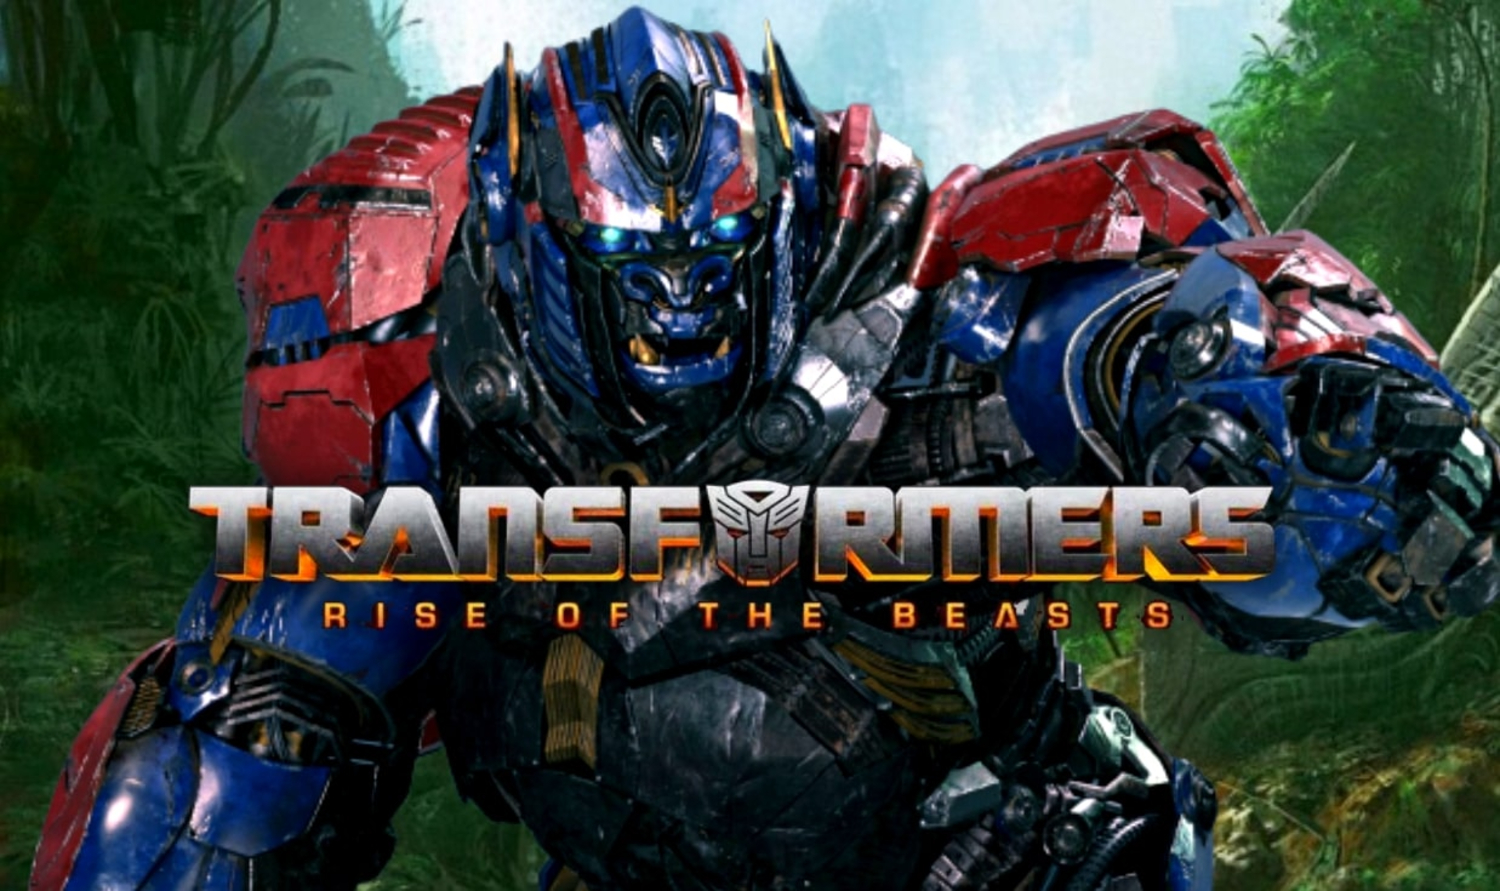 Download Transformer rise of best movie free